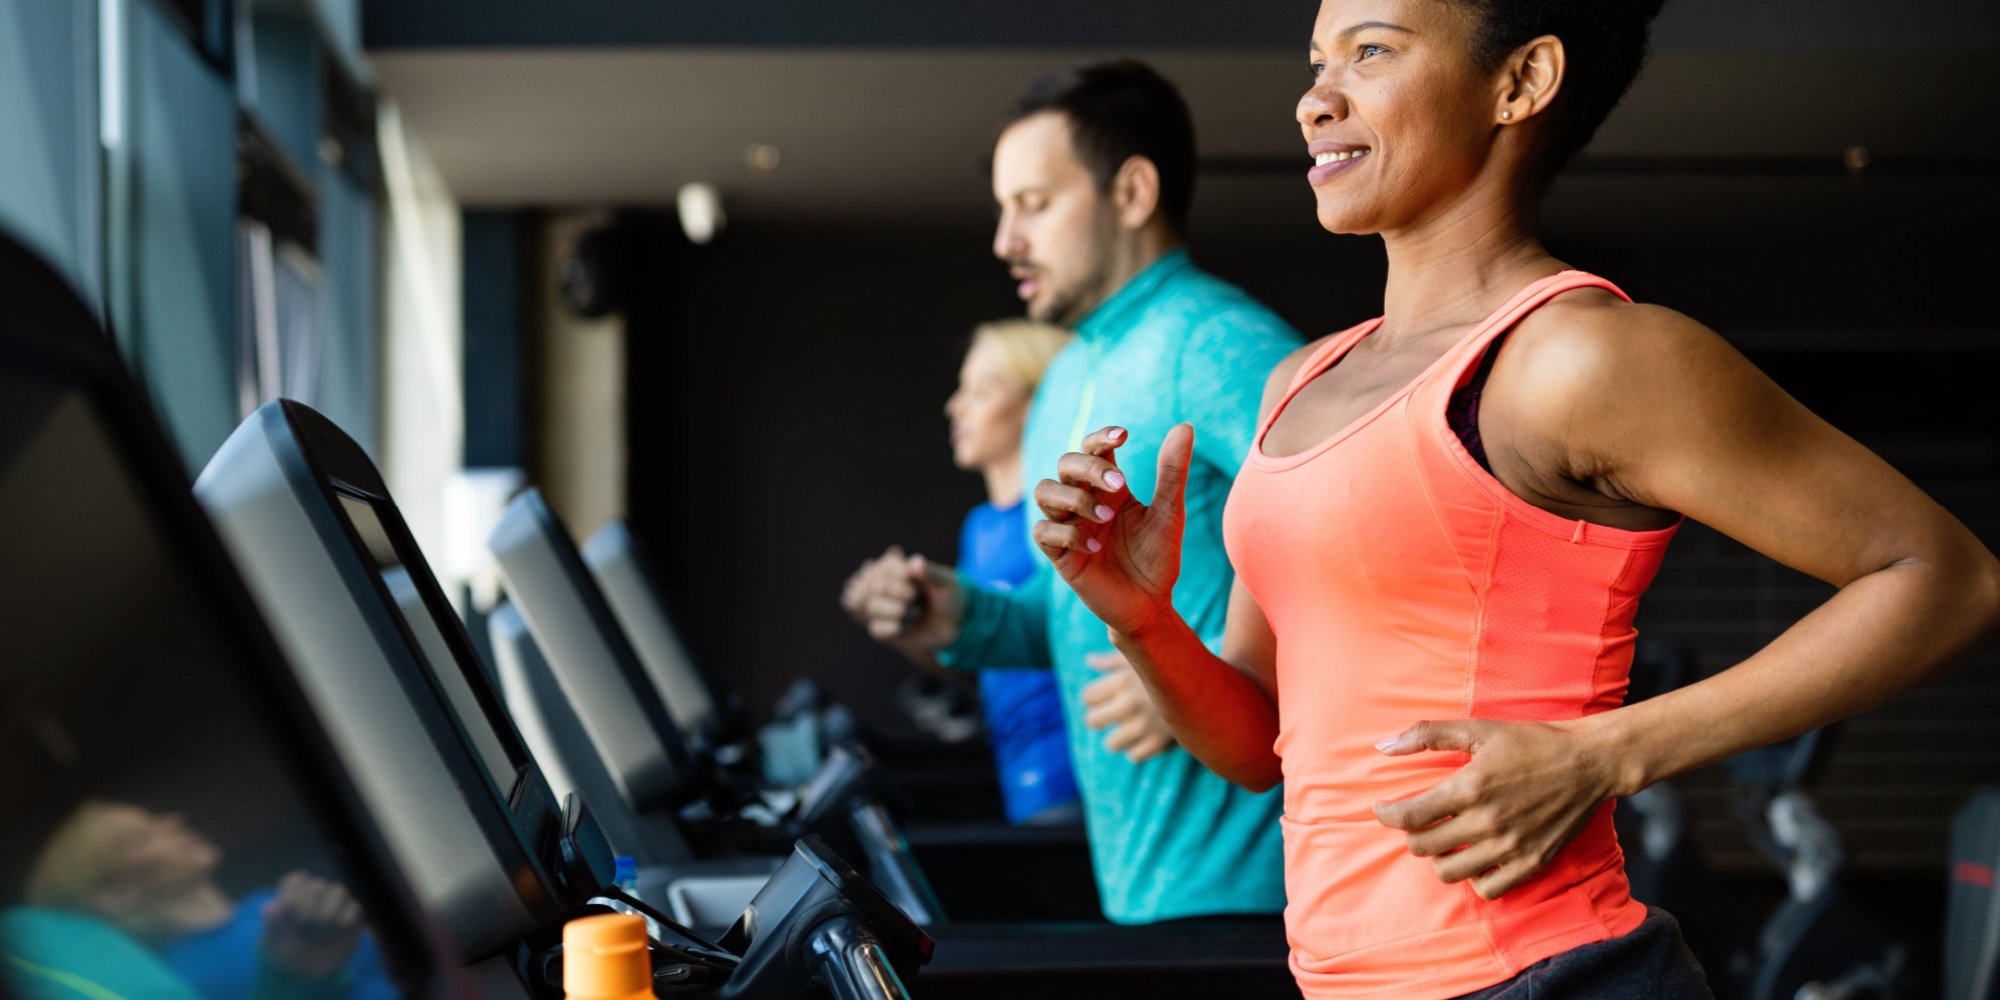 Are There Any Benefits to Doing Cardio Weekly?